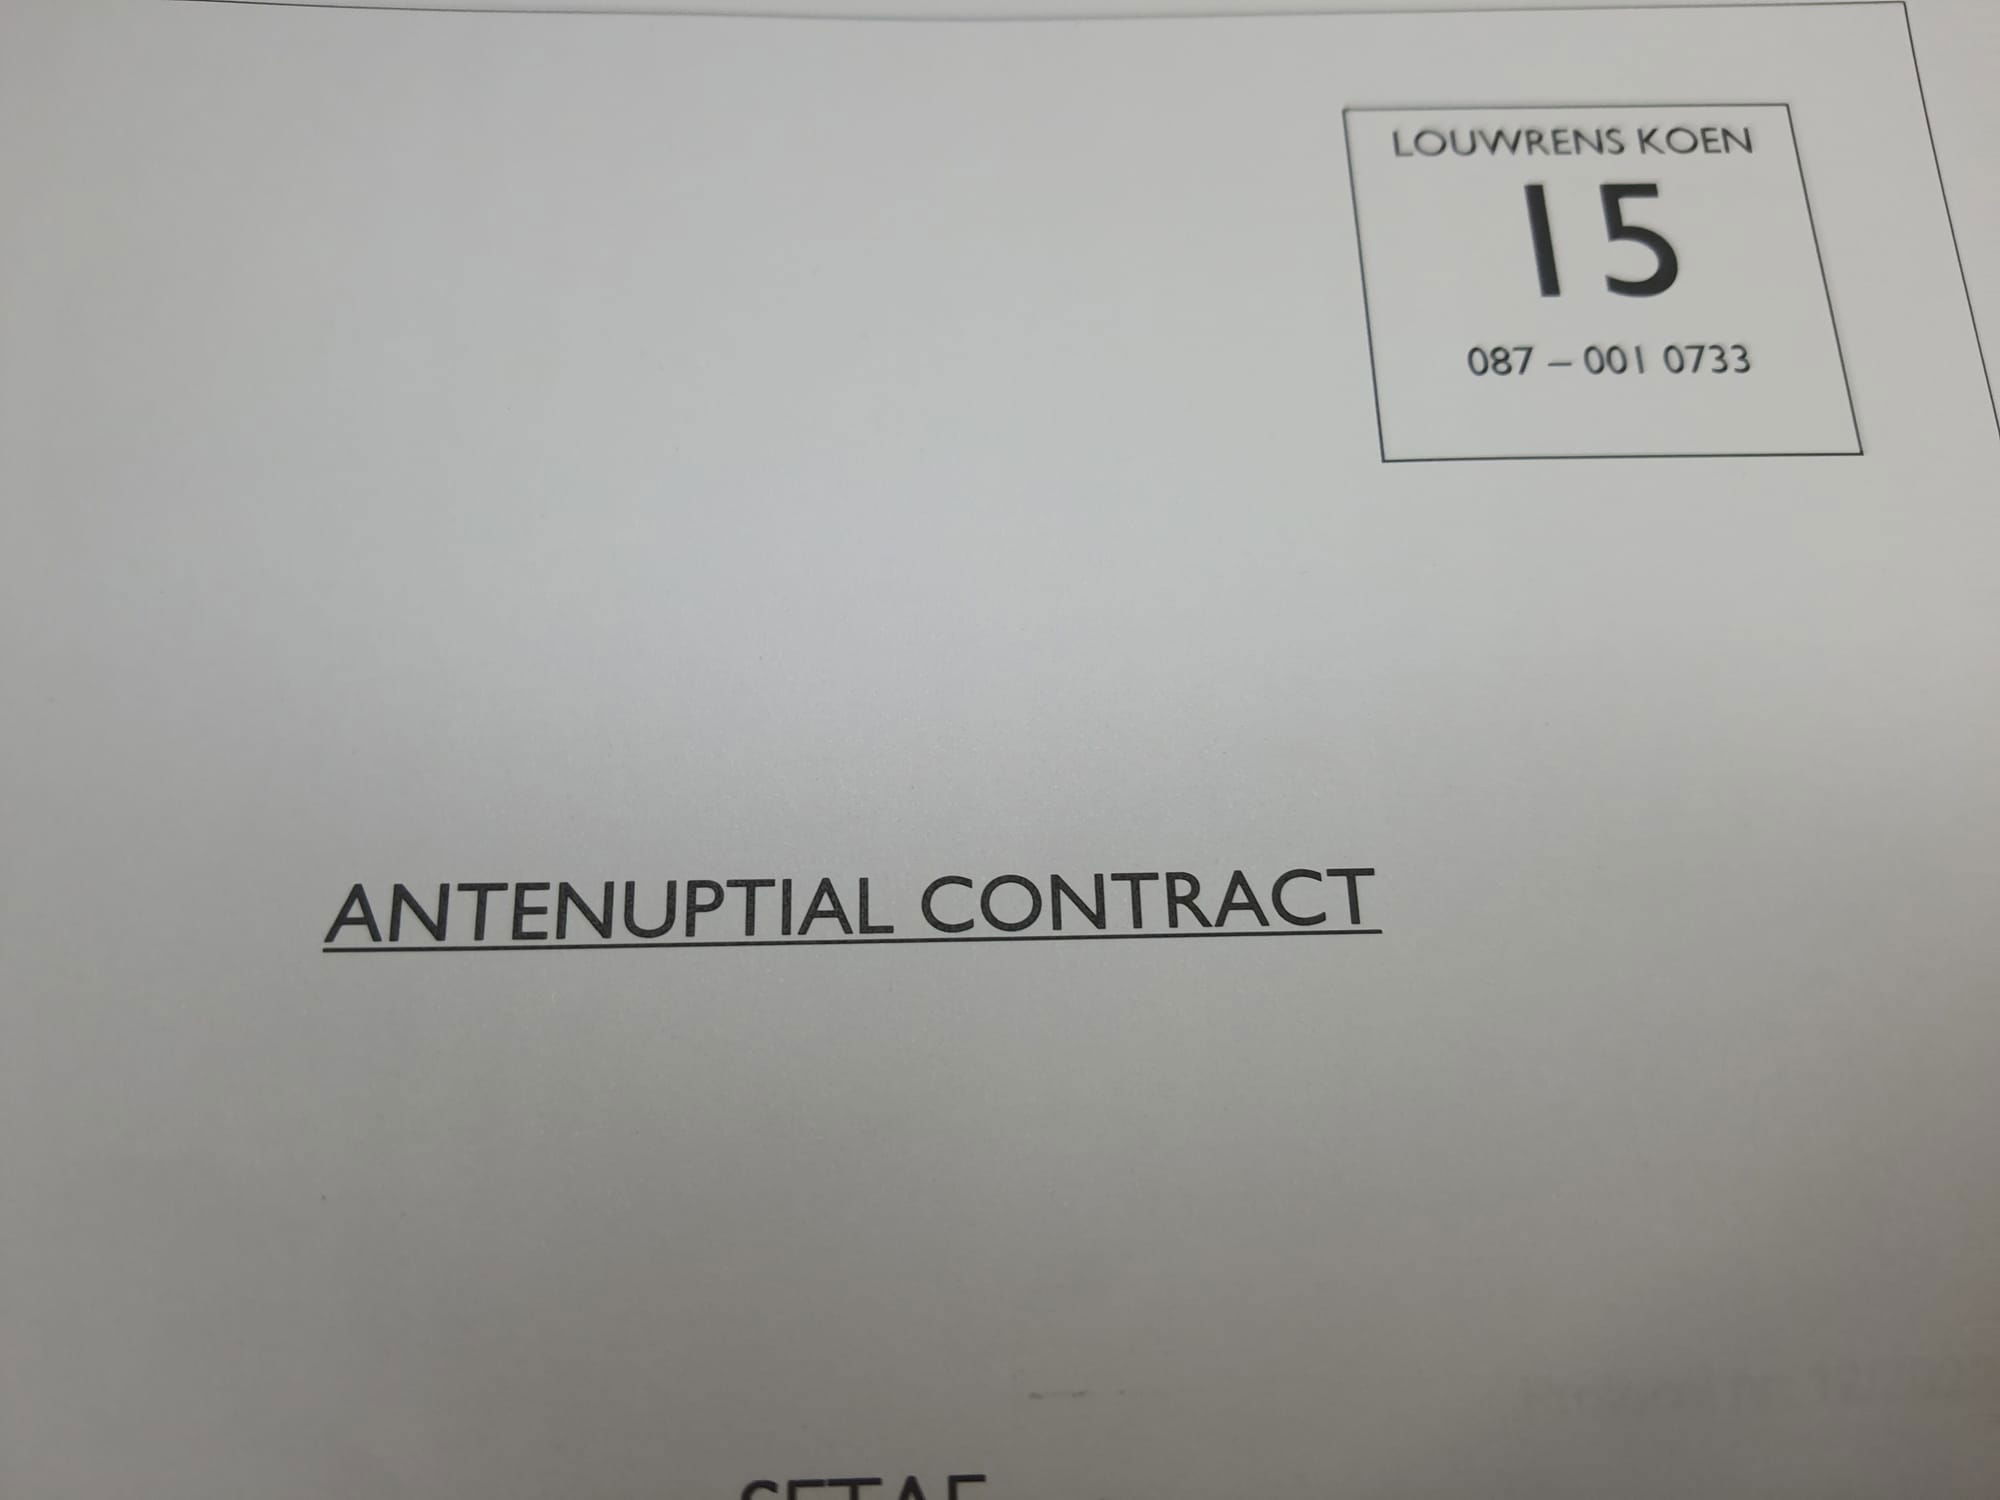 Antenuptial Contract Law Firm Lodgement Number 15